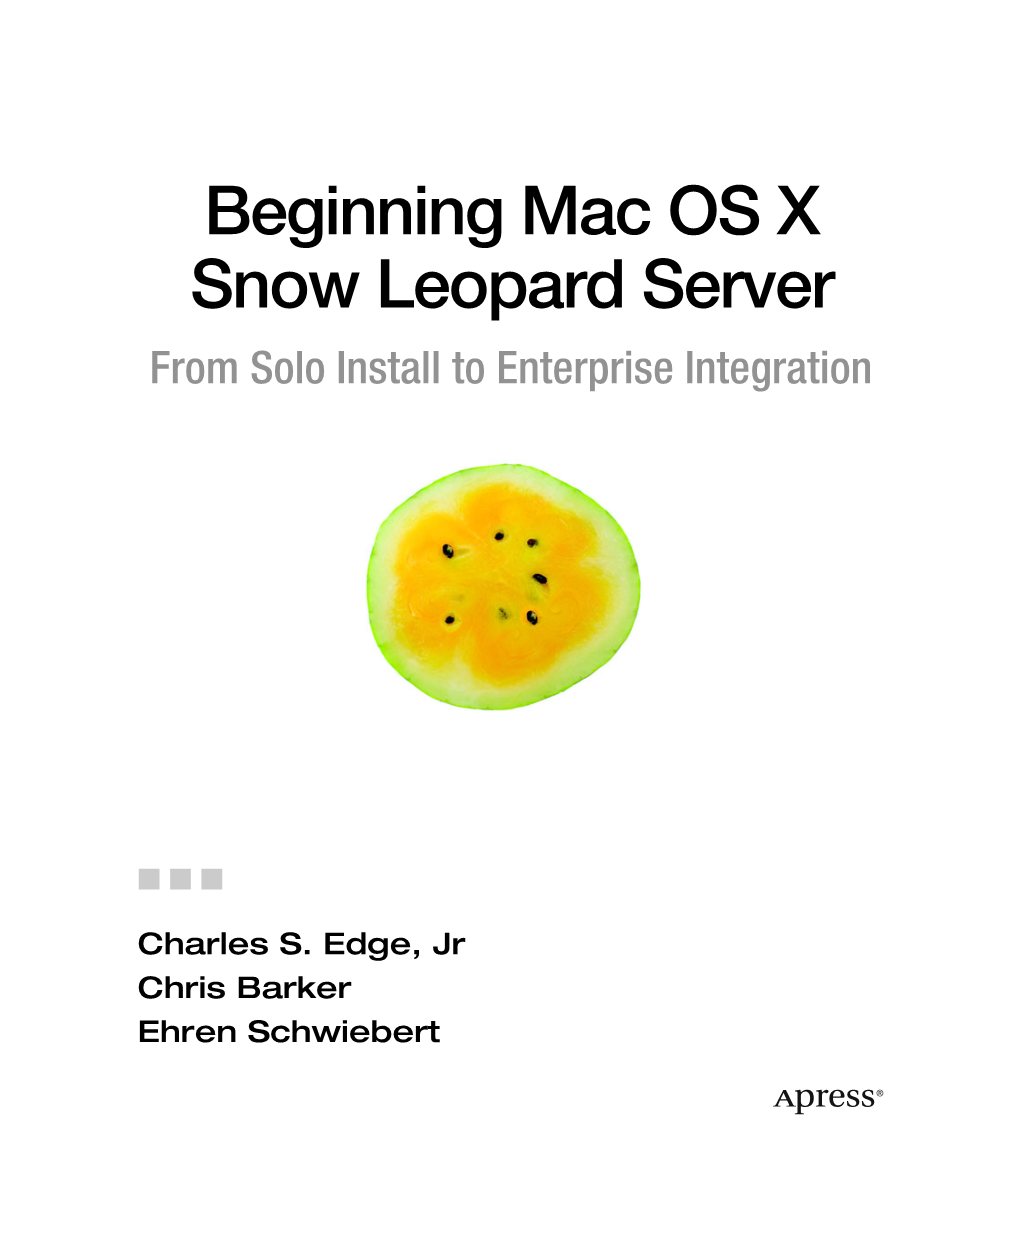 Beginning Mac OS X Snow Leopard Server from Solo Install to Enterprise Integration